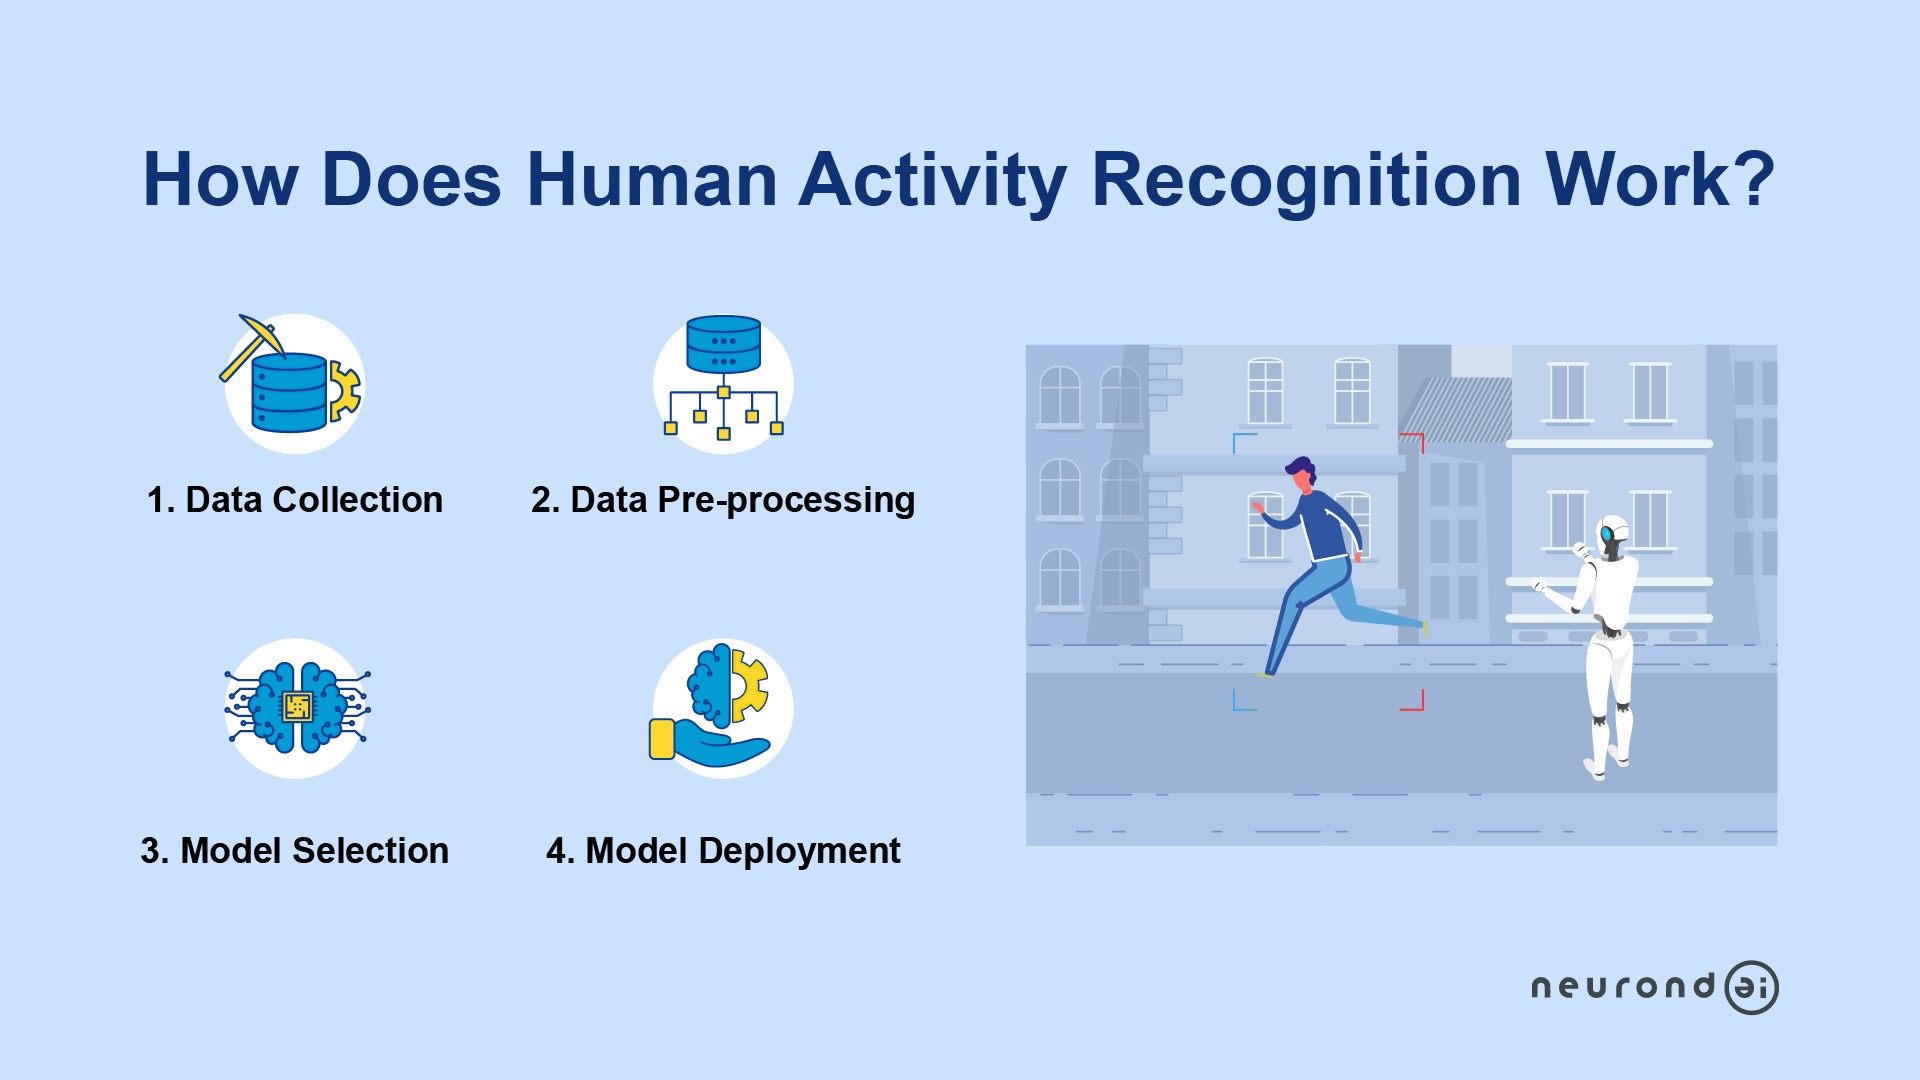 How Does Human Activity Recognition Work?